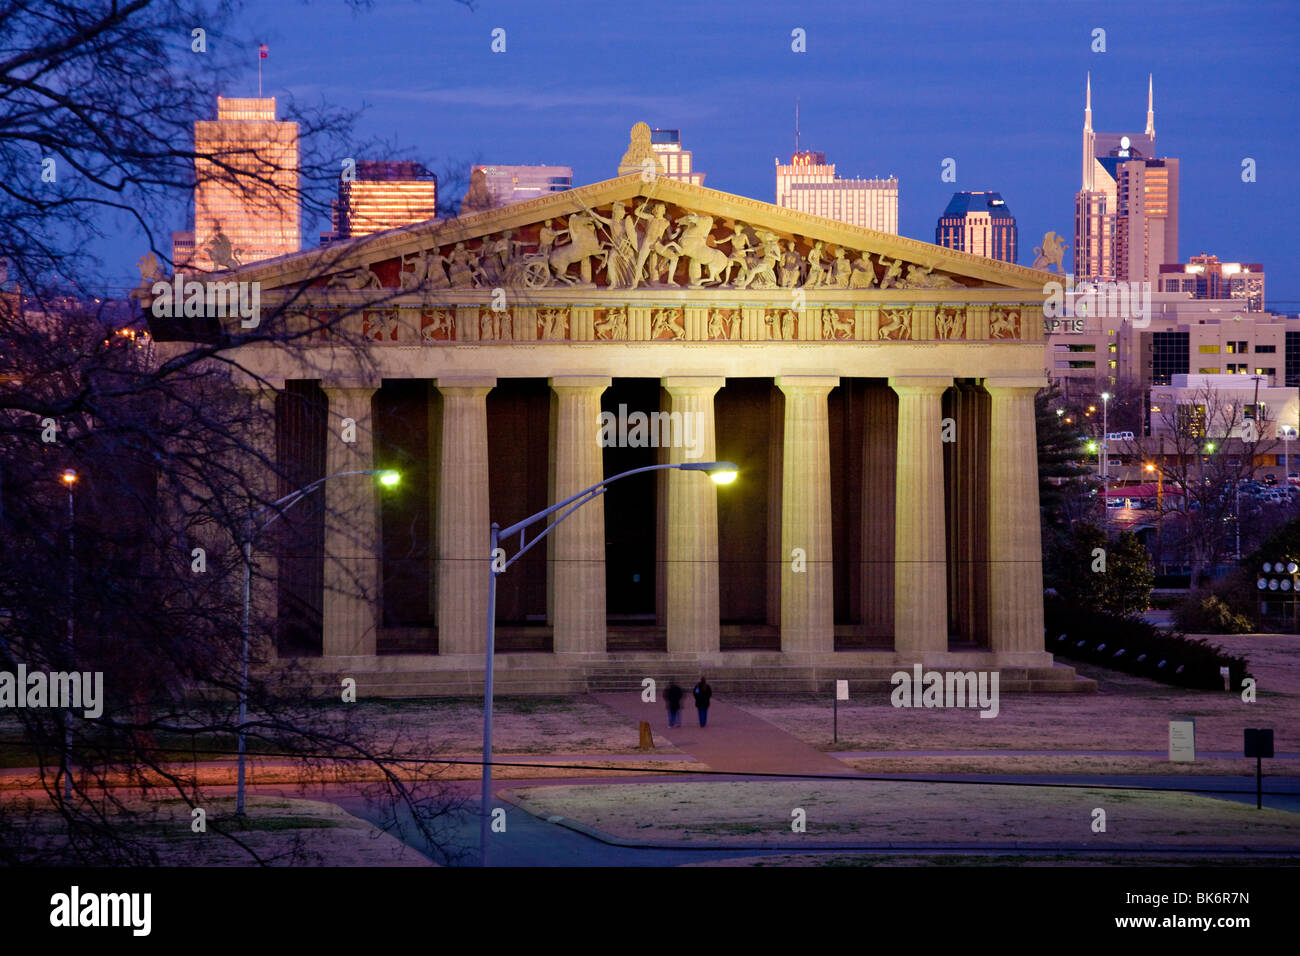 Parthenon replica in Nashville, Tennessee, with skyline behind Stock Photo